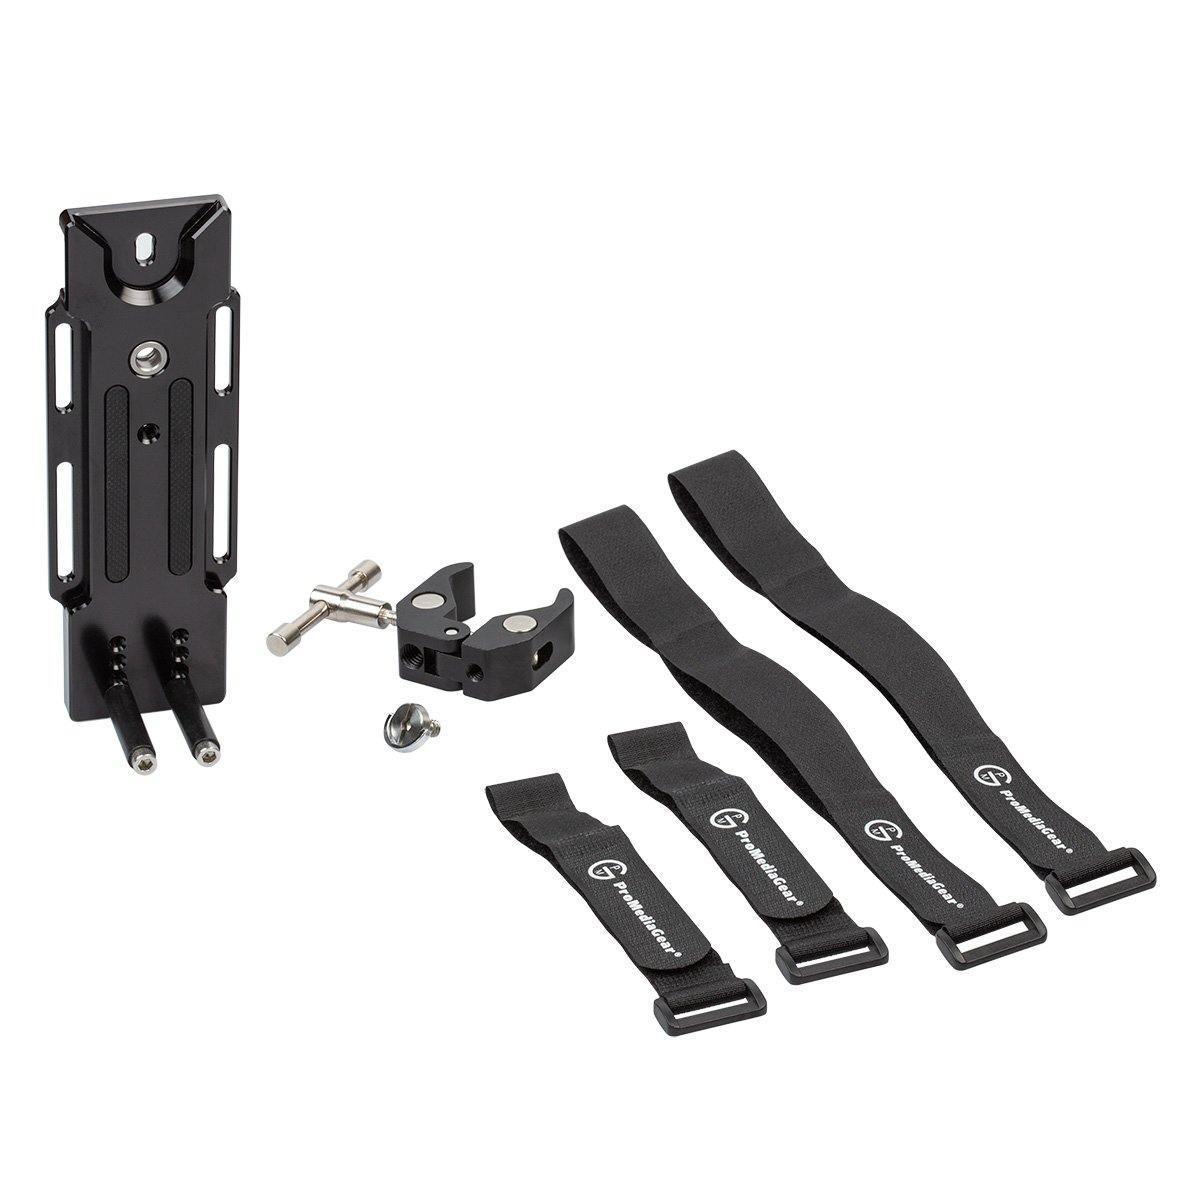 Kit contains (4) Velcro Pieces, Clamp and Adjustable Holder